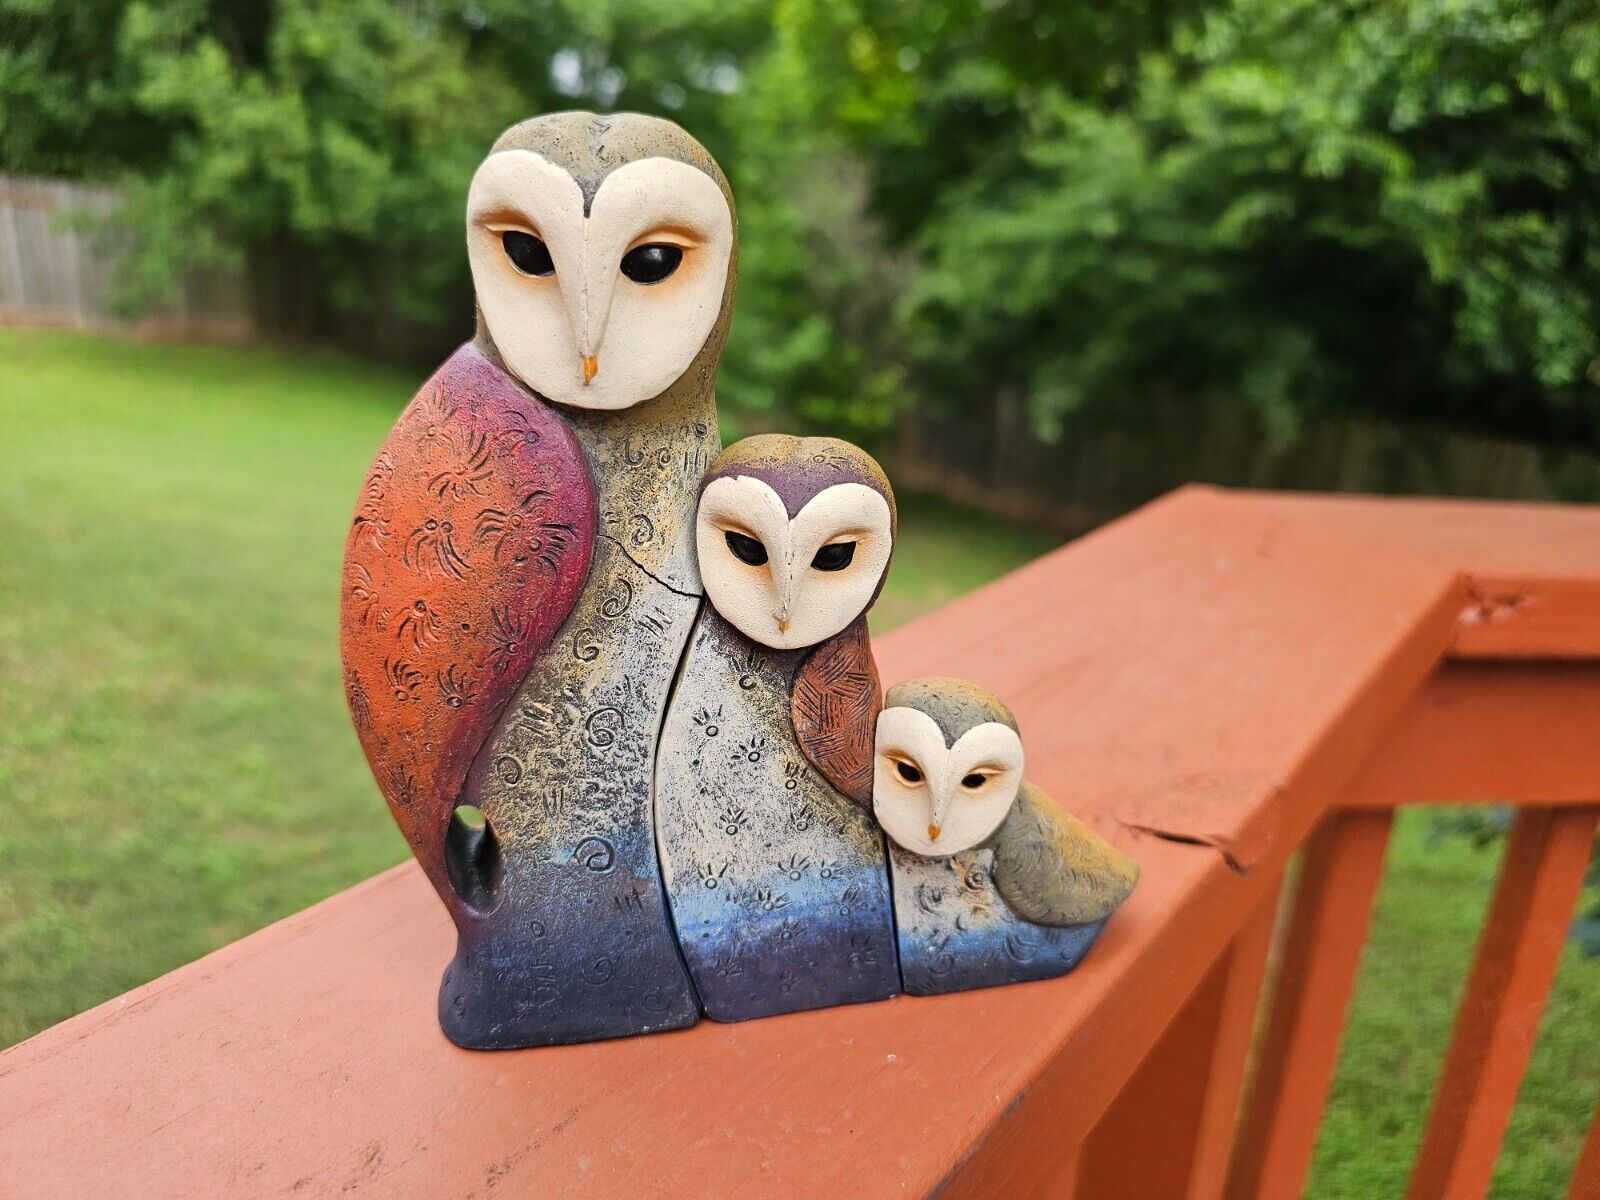 MCM Trio/family of owls nesting interlocking figurines mother and child